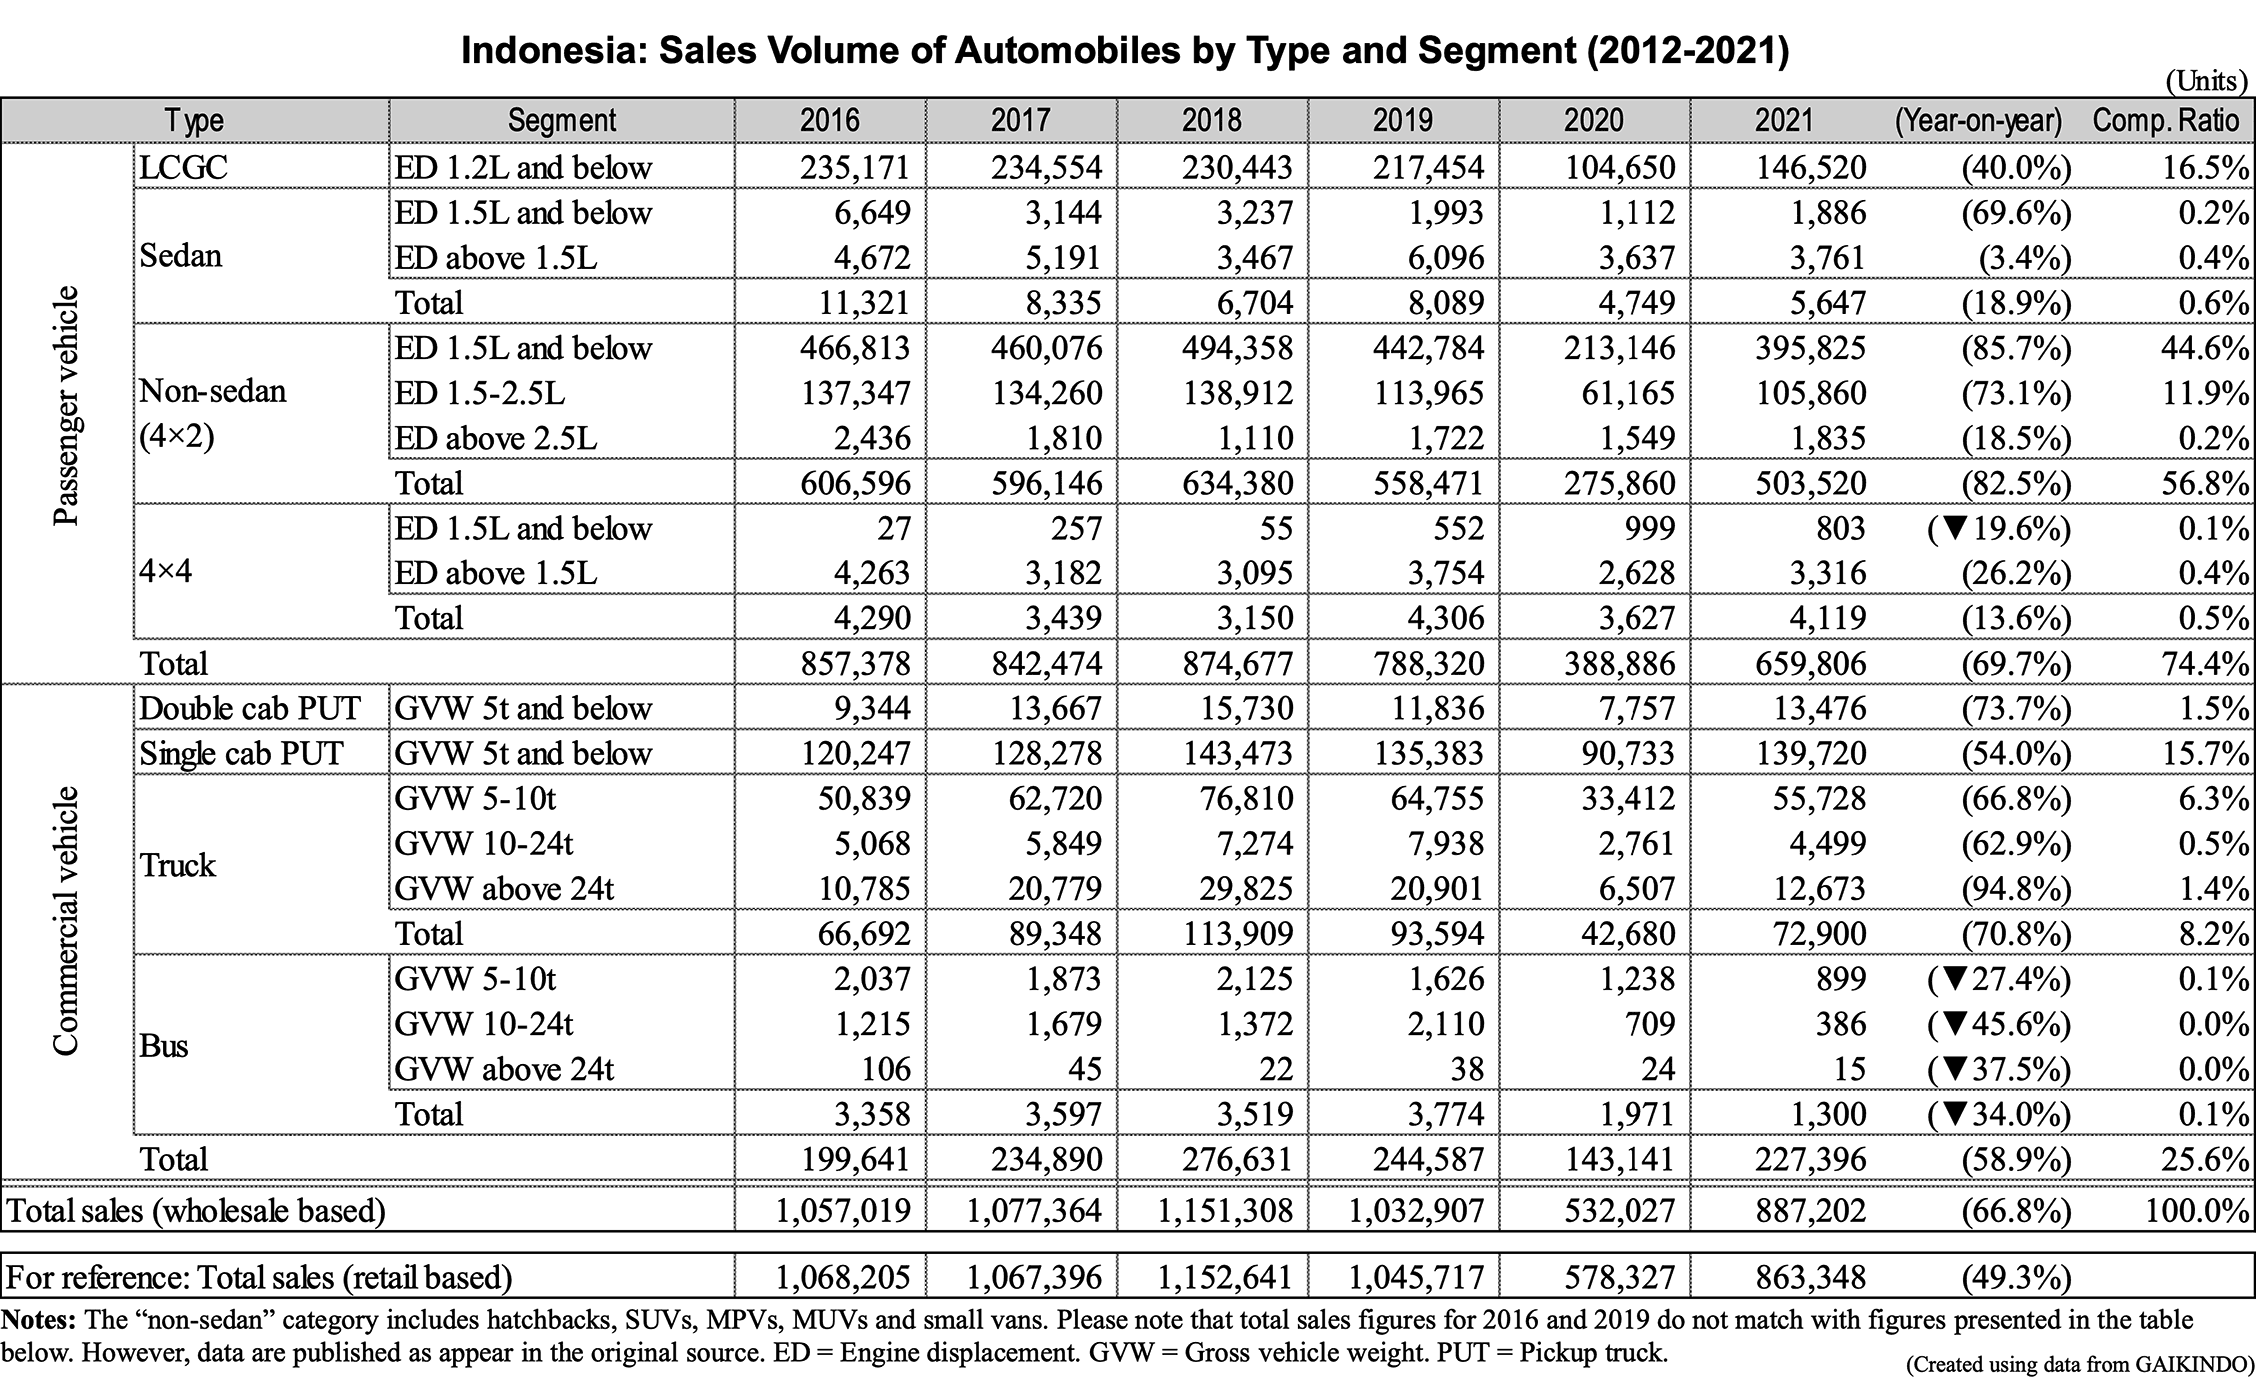 Table: Indonesia: Sales Volume of Automobiles by Type and Segment (2012-2021)